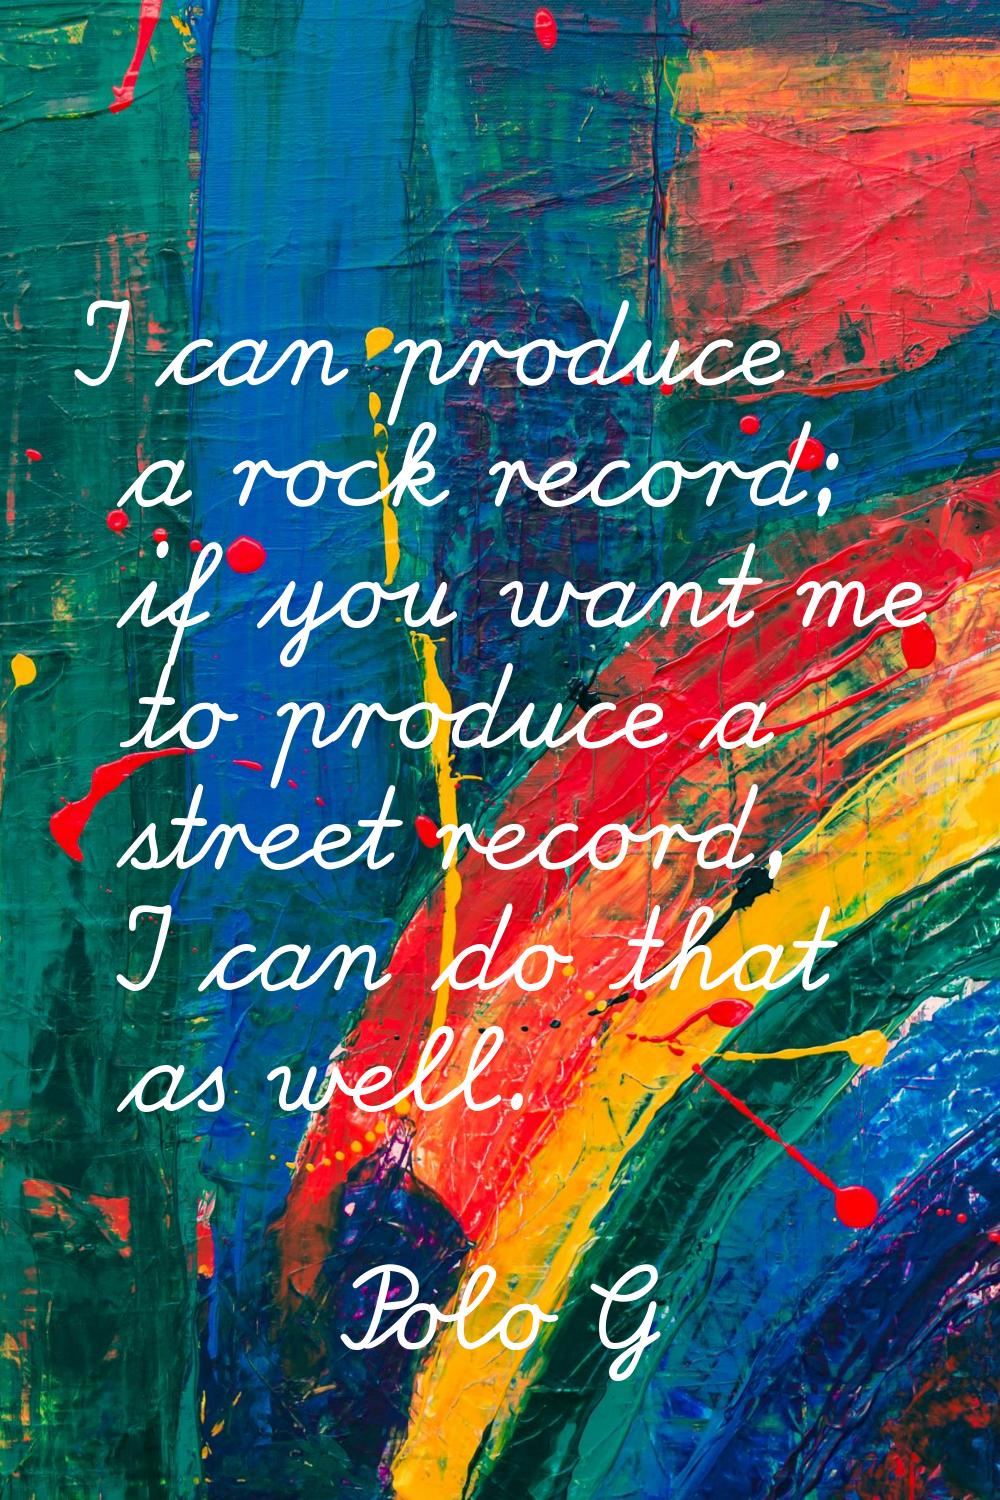 I can produce a rock record; if you want me to produce a street record, I can do that as well.